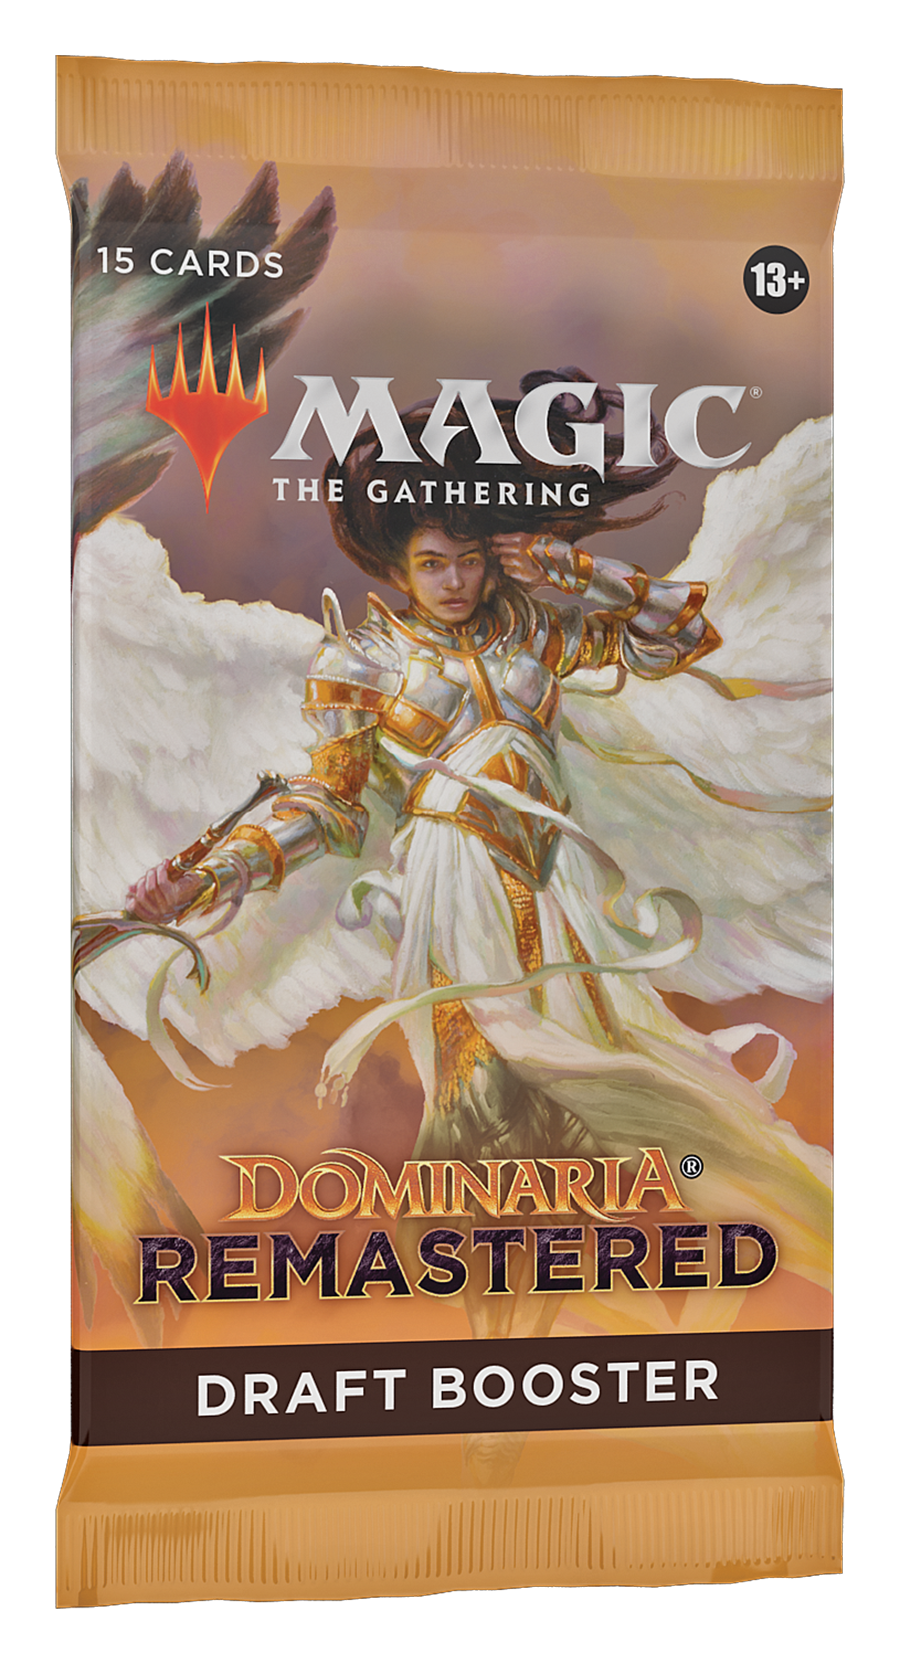 Magic: The Gathering Dominaria Remastered Draft Booster